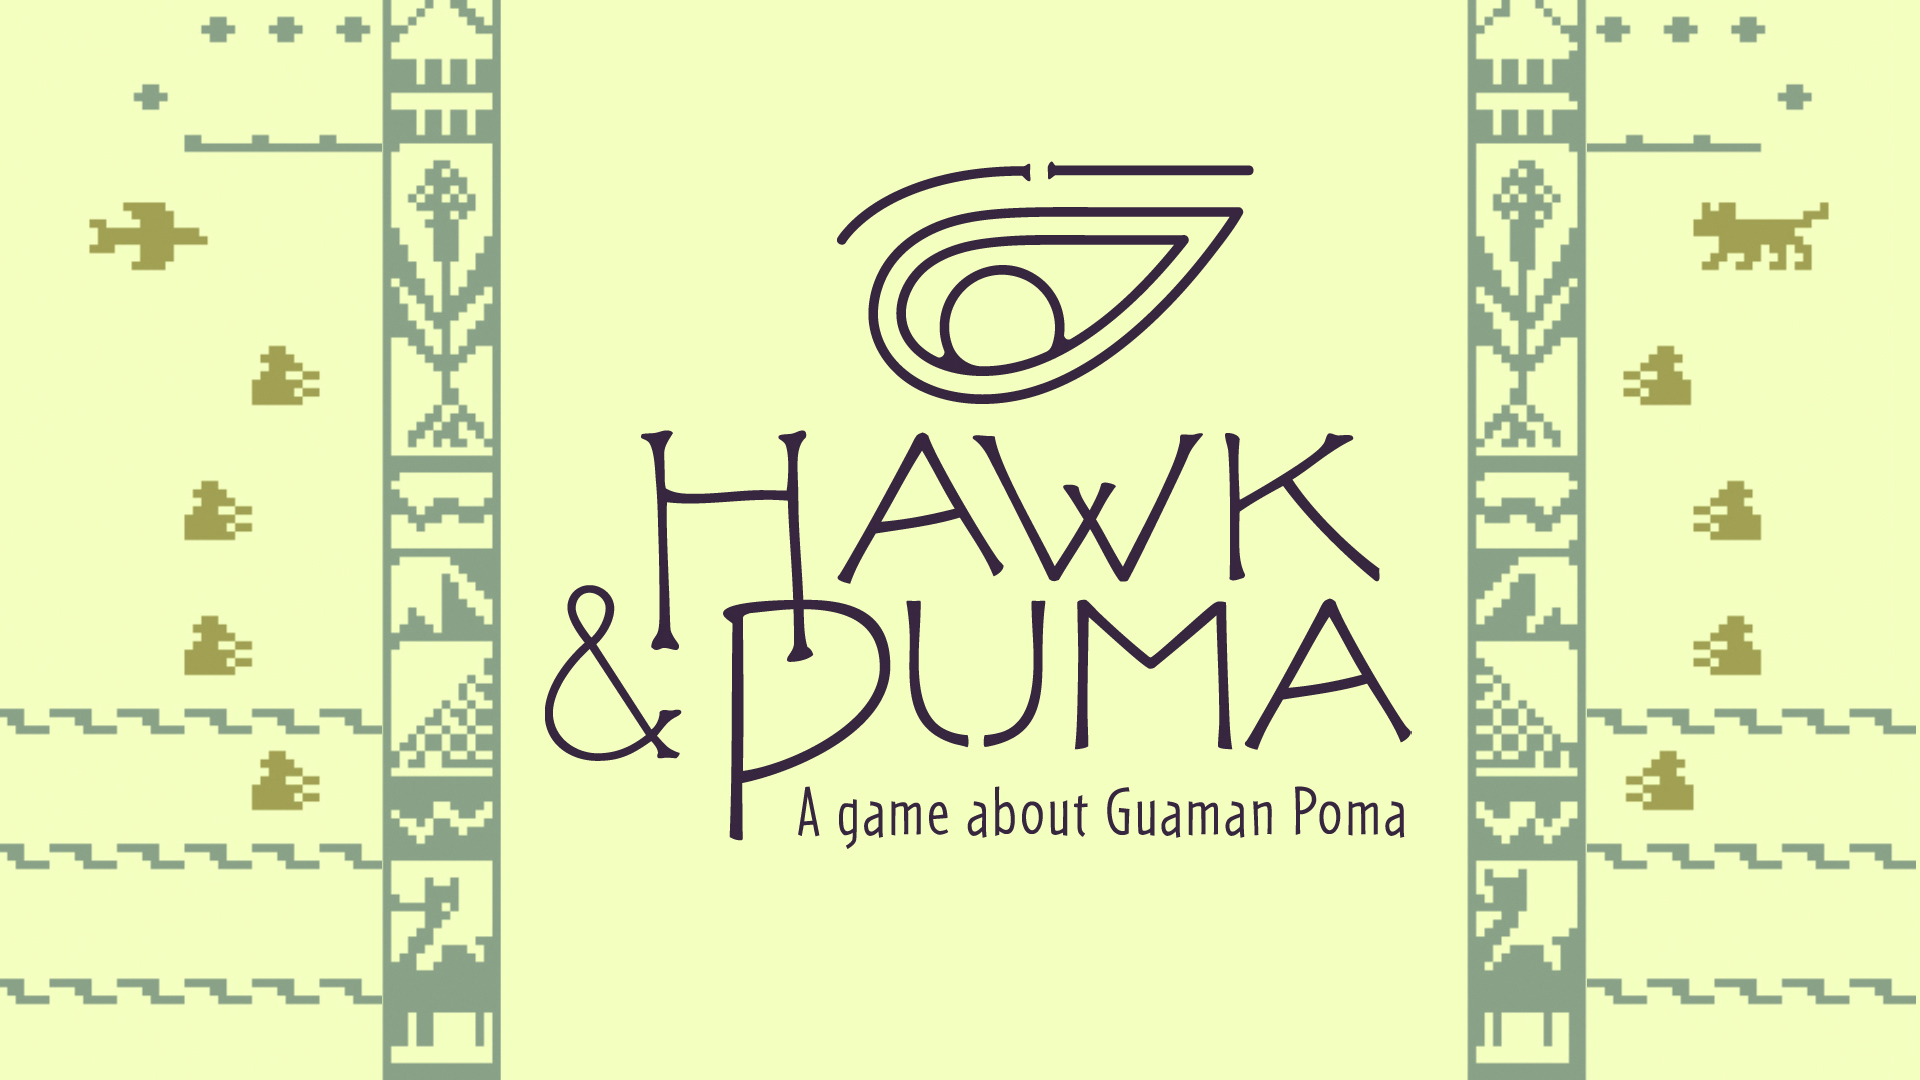 Hawk & Puma [A game about the indigenous chronicler Guamán Poma]